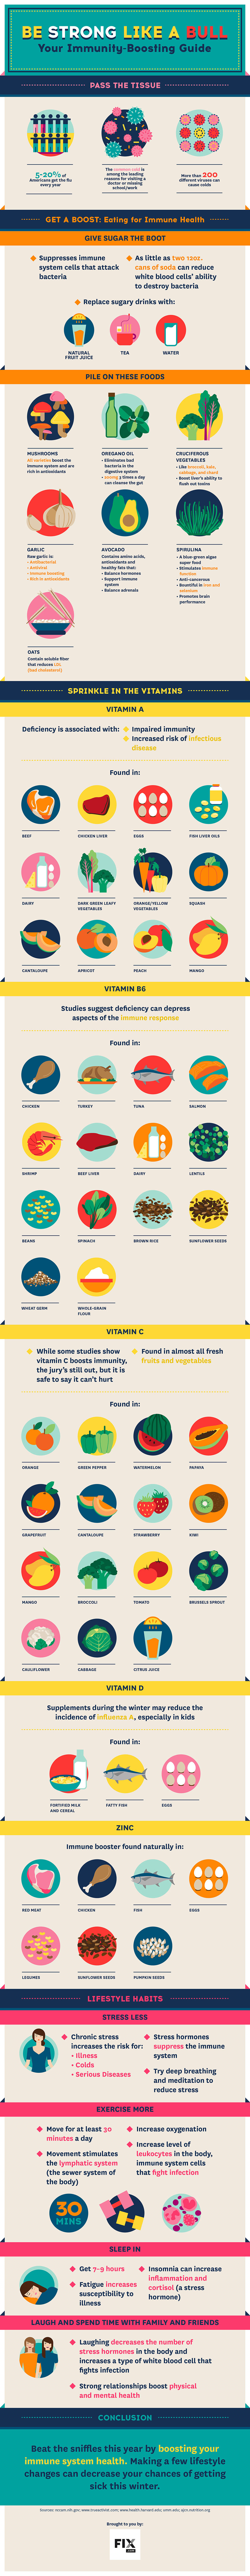 Eat Right, Sleep Right and Keep Laughing: Your Best Immunity Boosters - Infographic